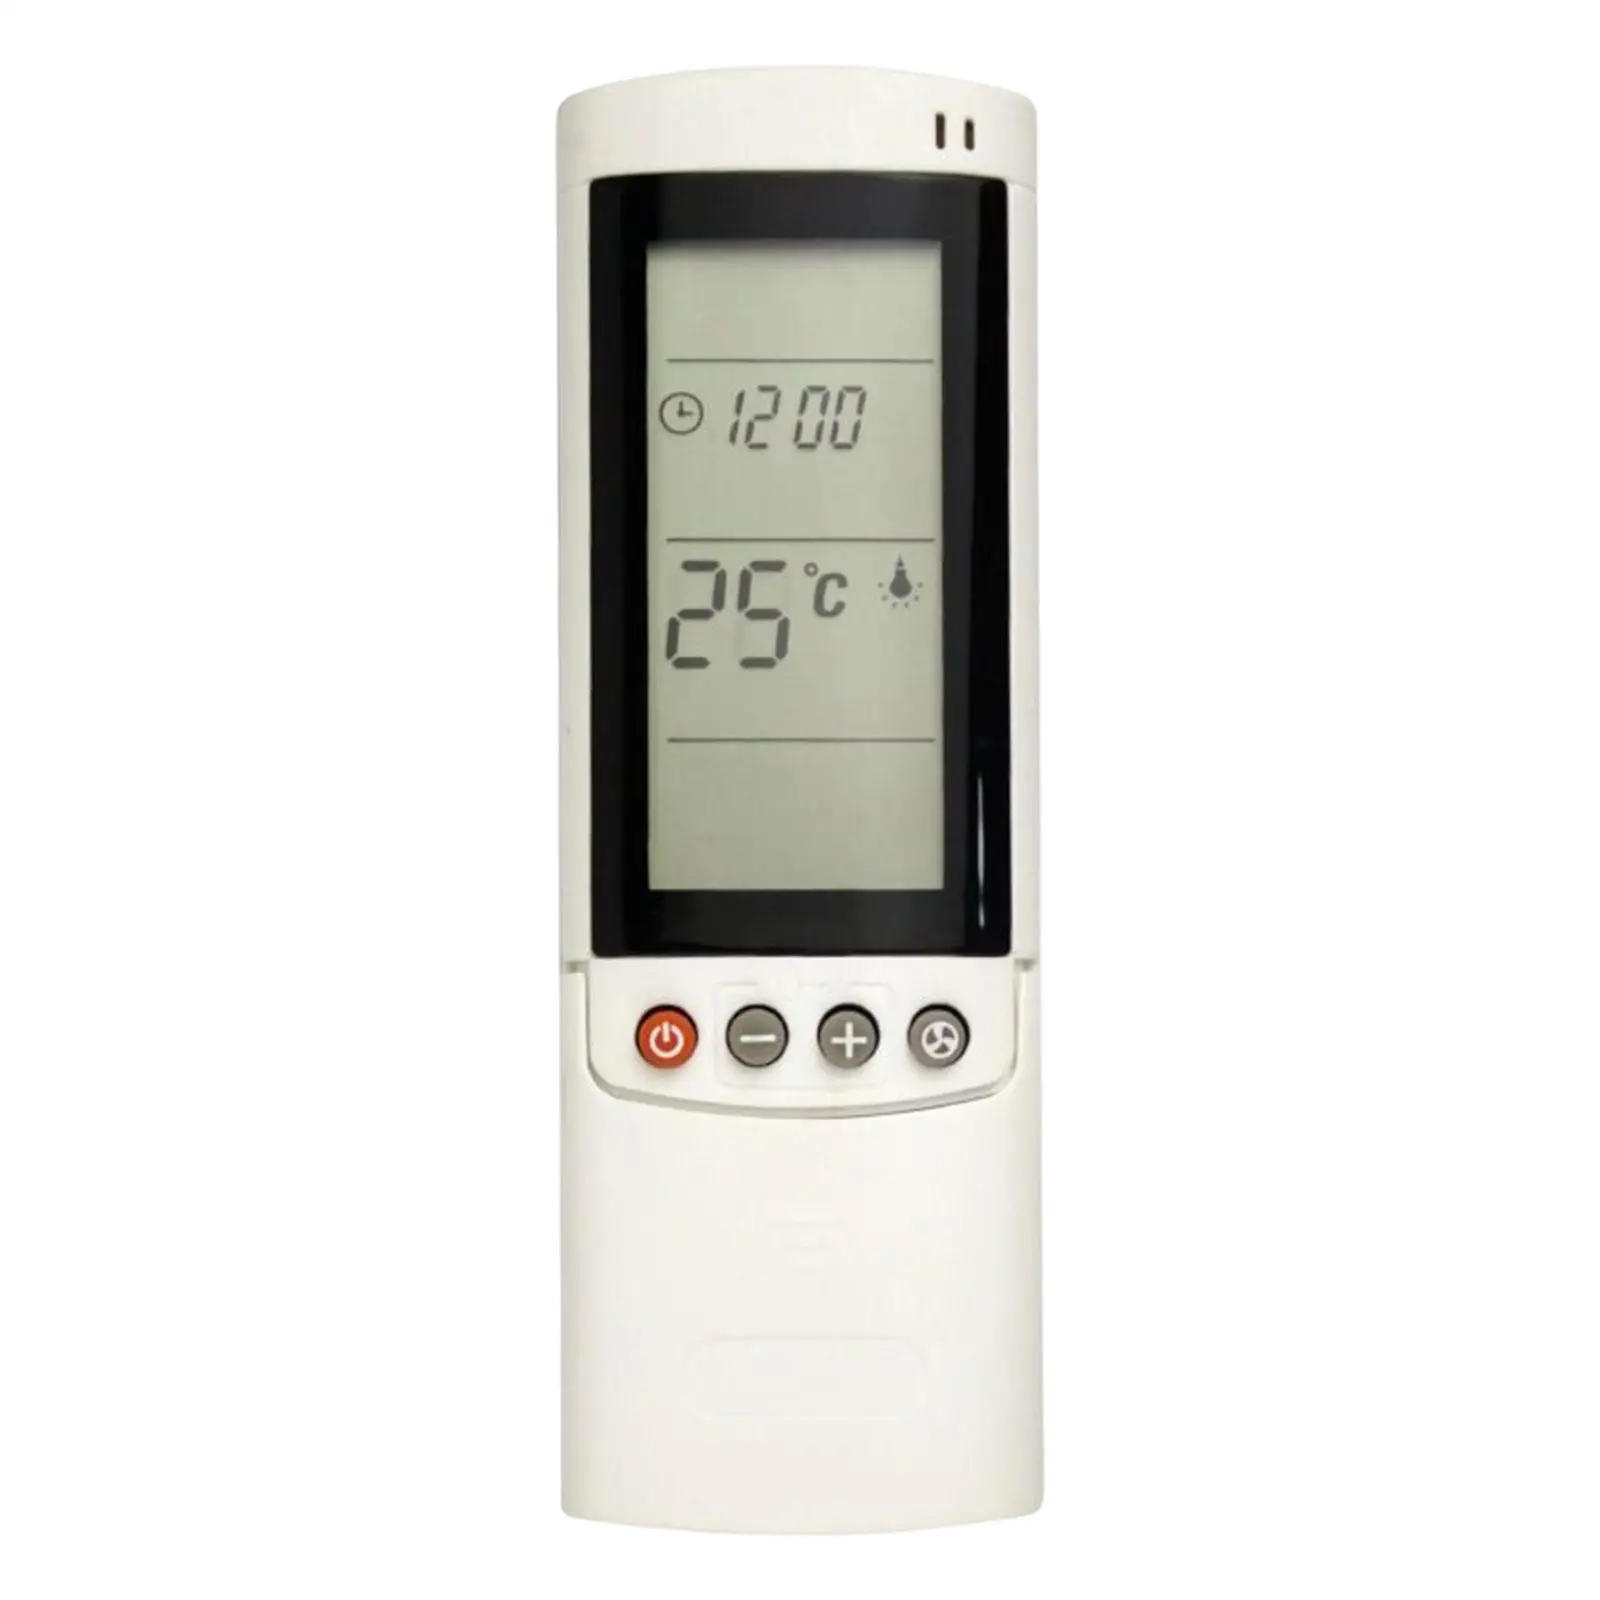   A/C Remote Control for RC08A RC08W Heating Cooling Air Conditioner Supplies LCD Display Comfortable Buttons Power Saving.